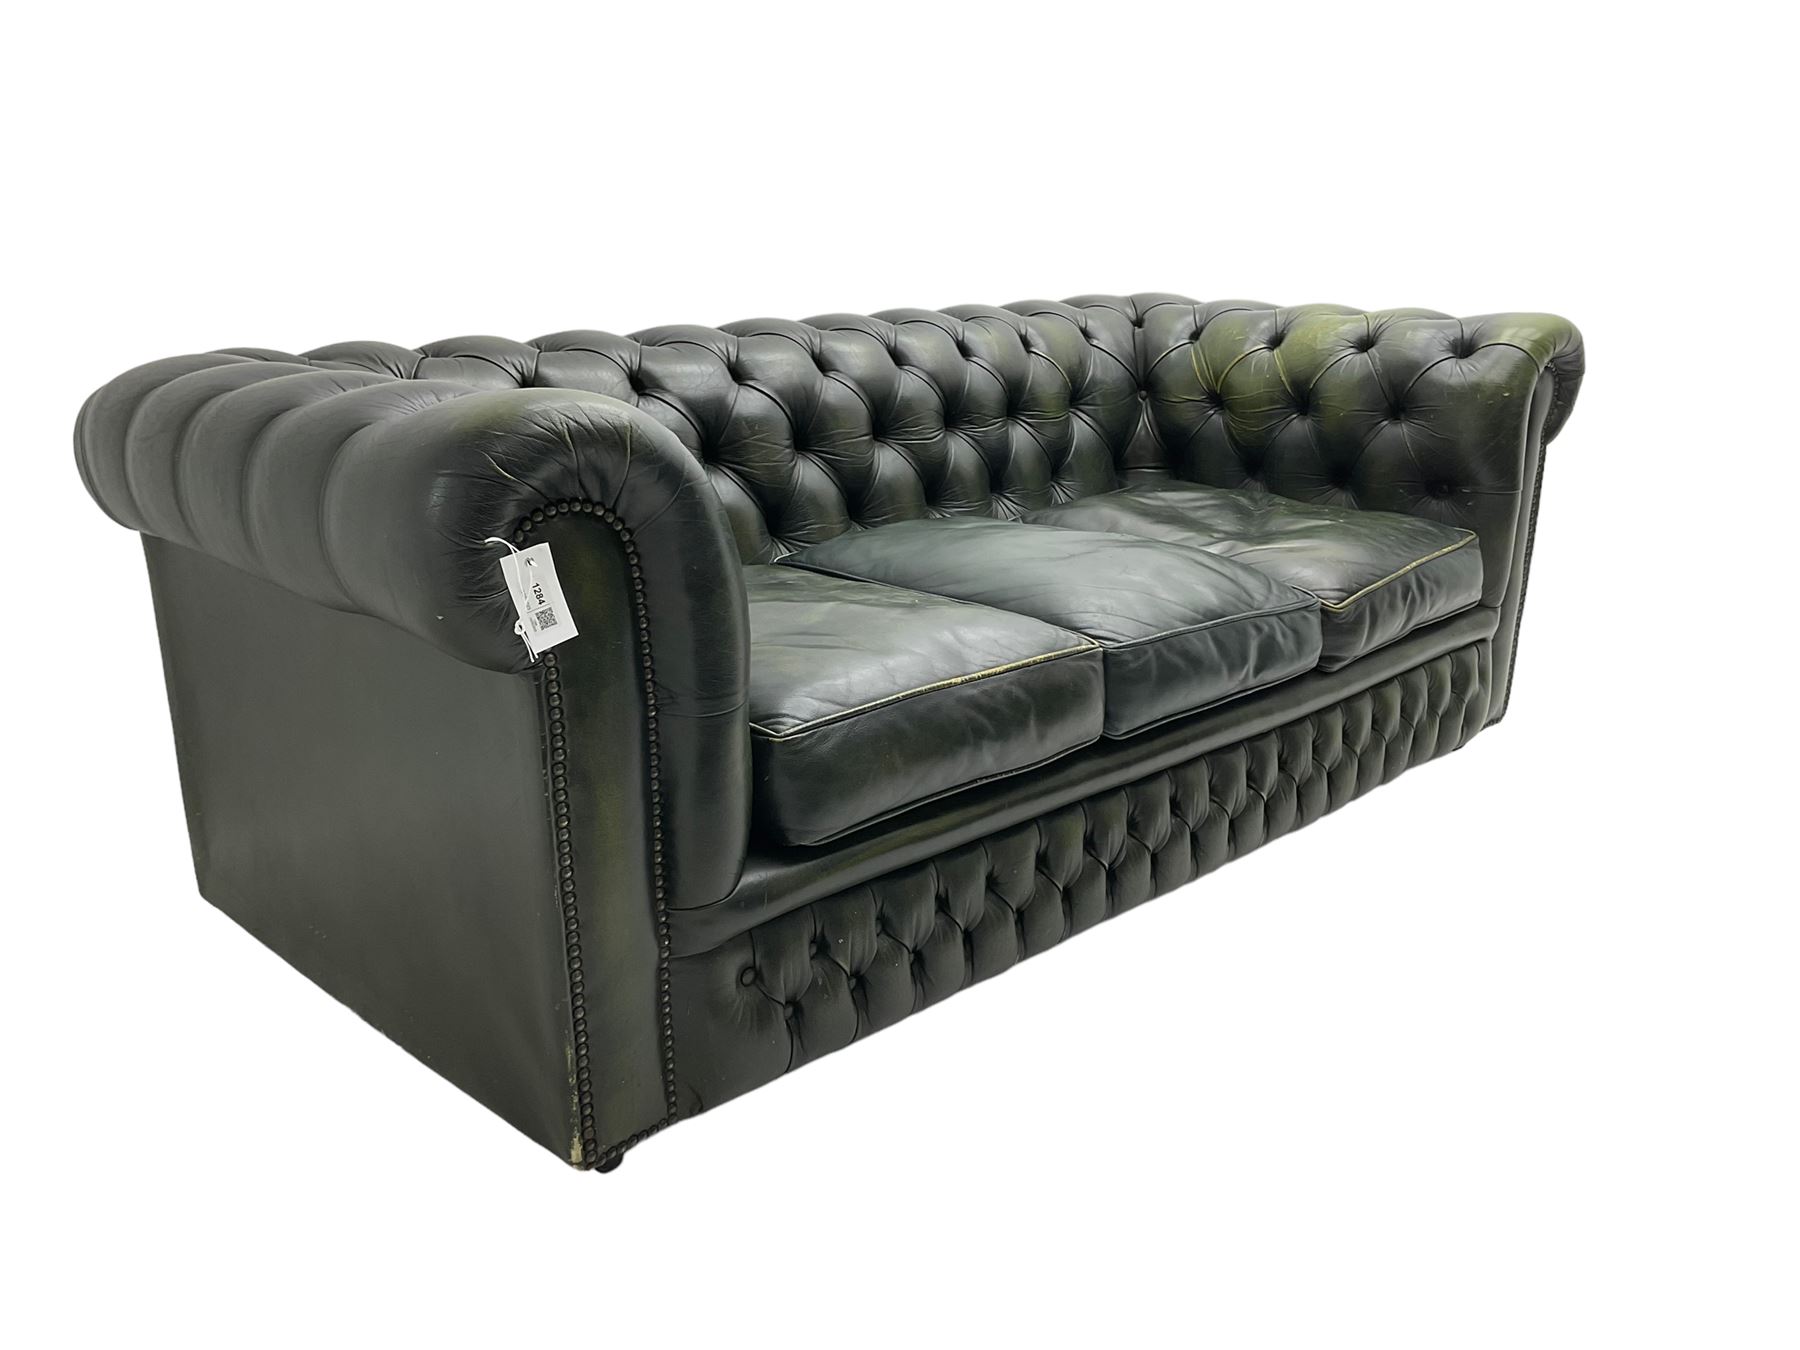 Chesterfield three seat sofa - Image 5 of 7